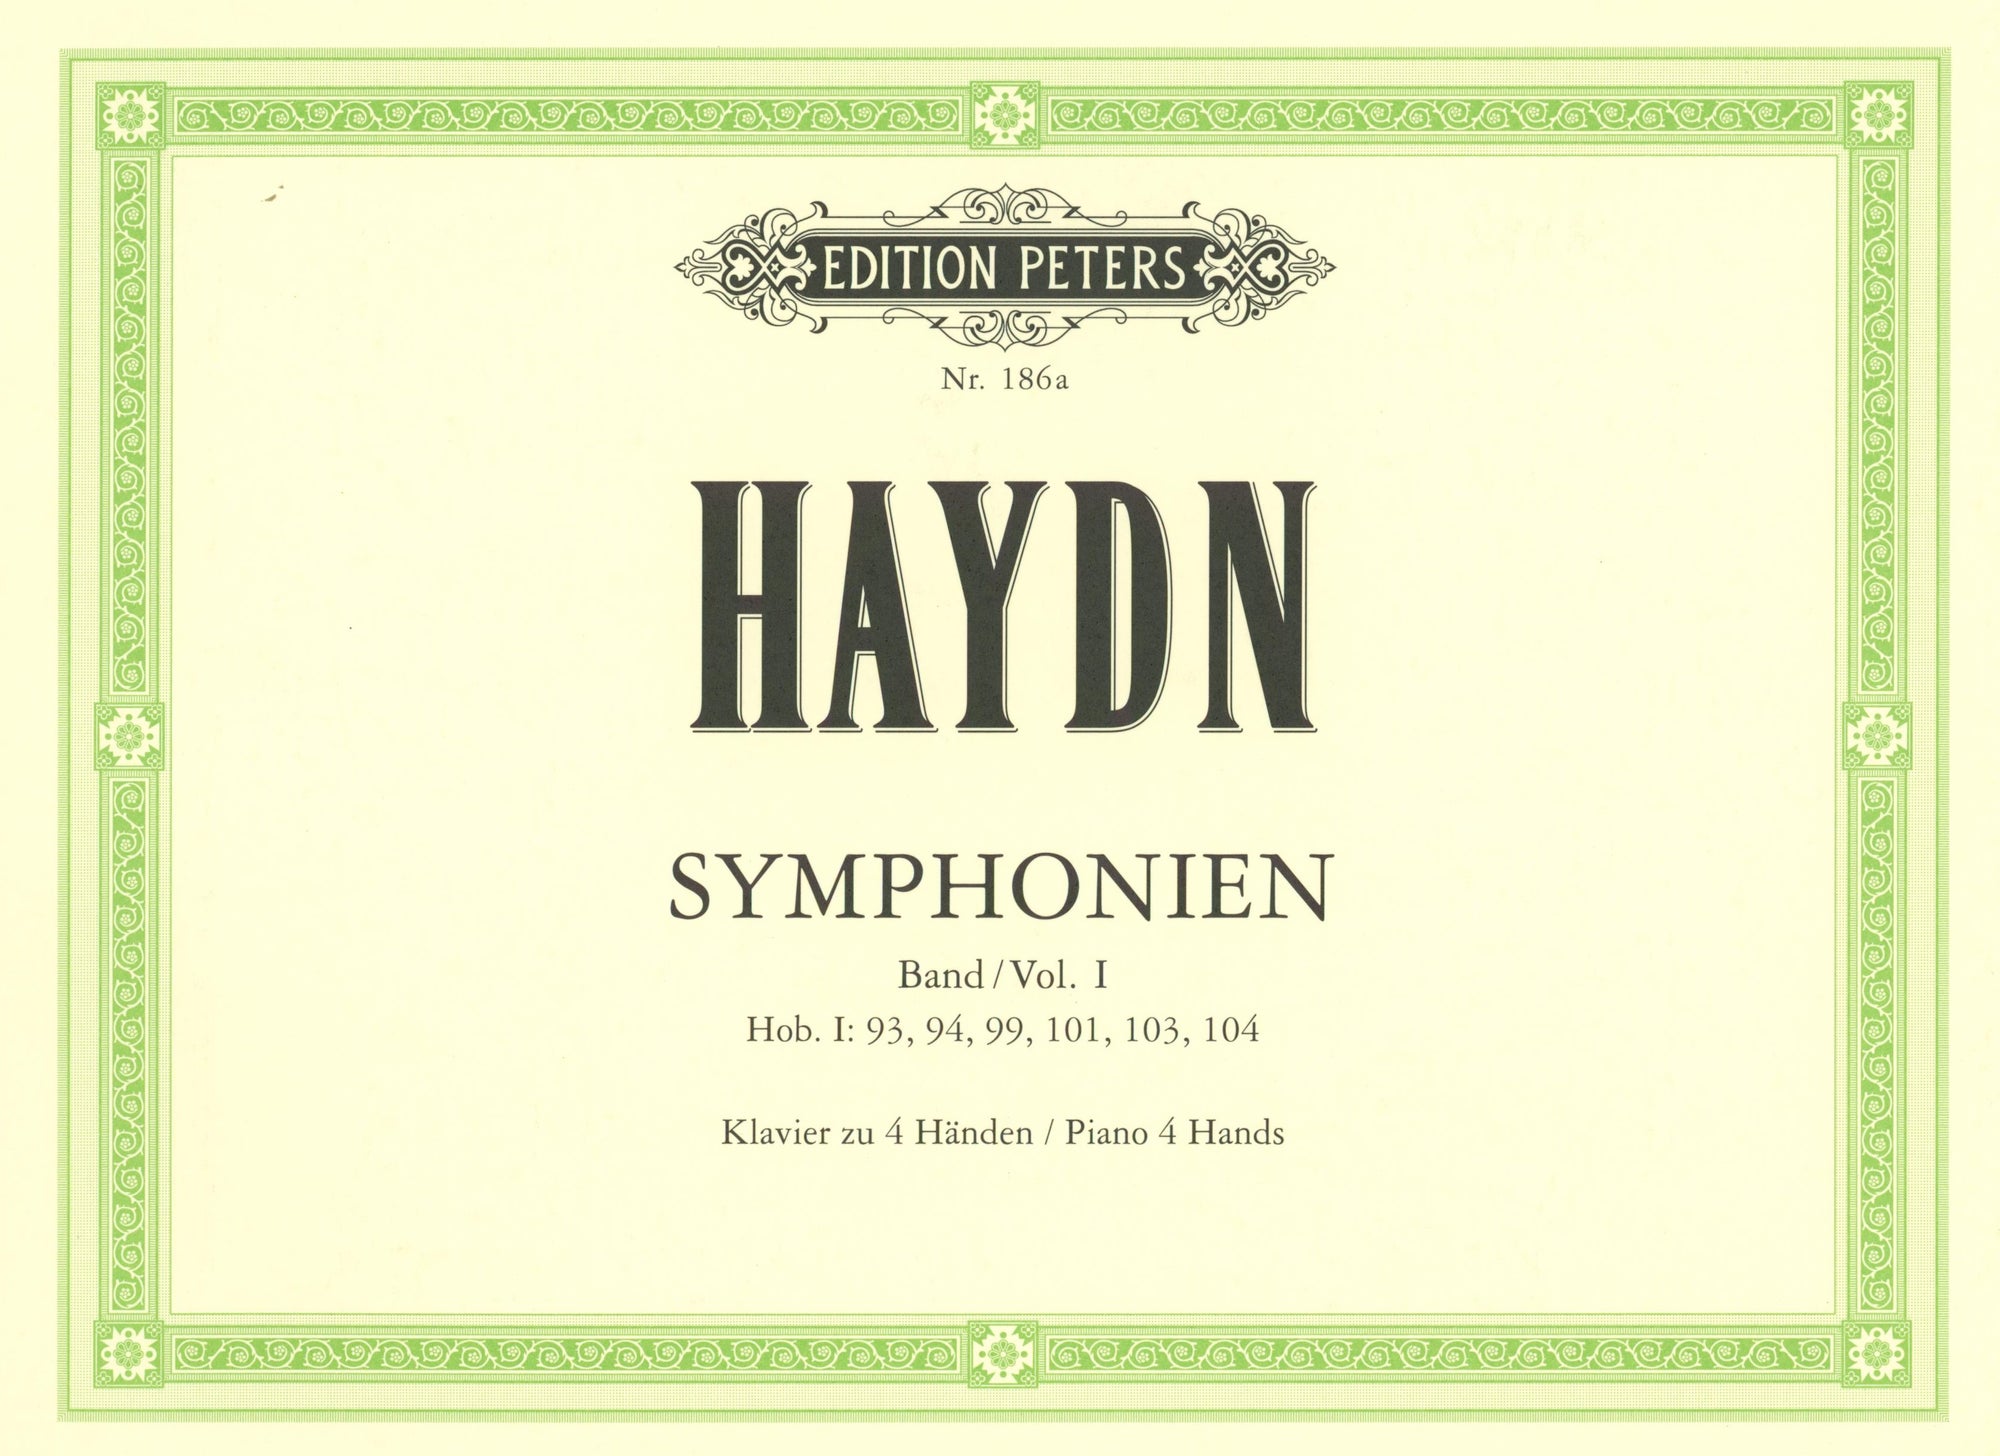 Haydn: Symphonies 93, 94, 99, 101, 103, 104 (arr. for piano 4-hands)